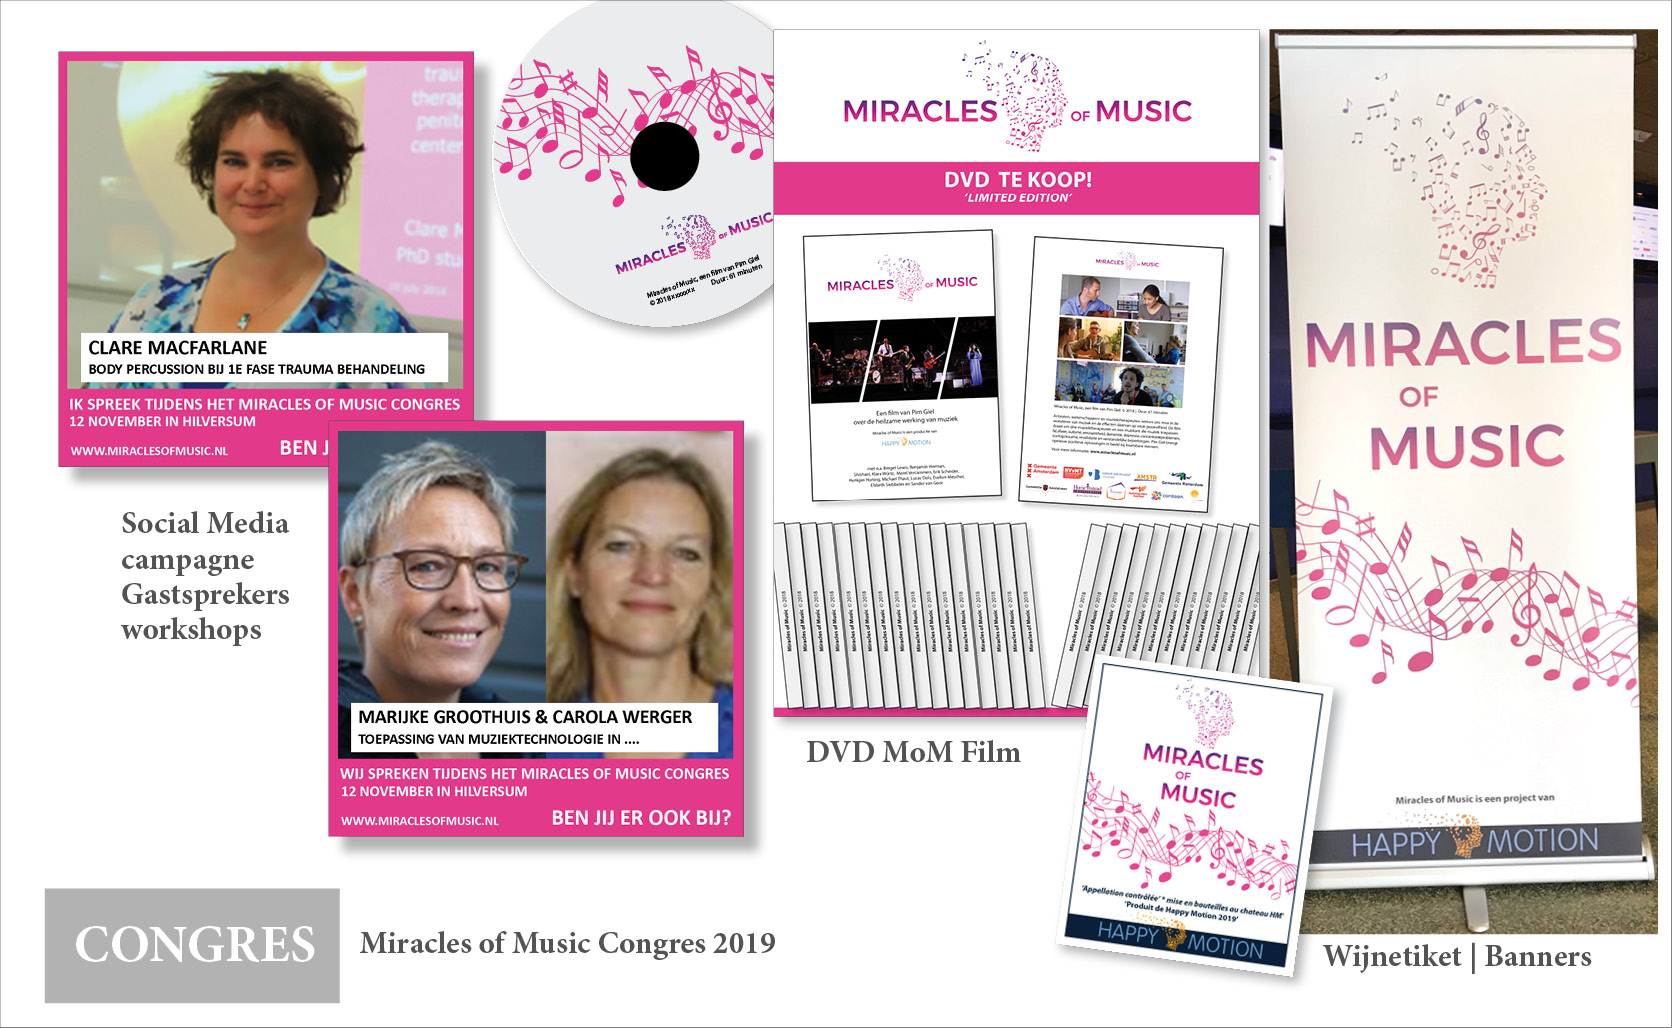 Congres items Miracles of Music